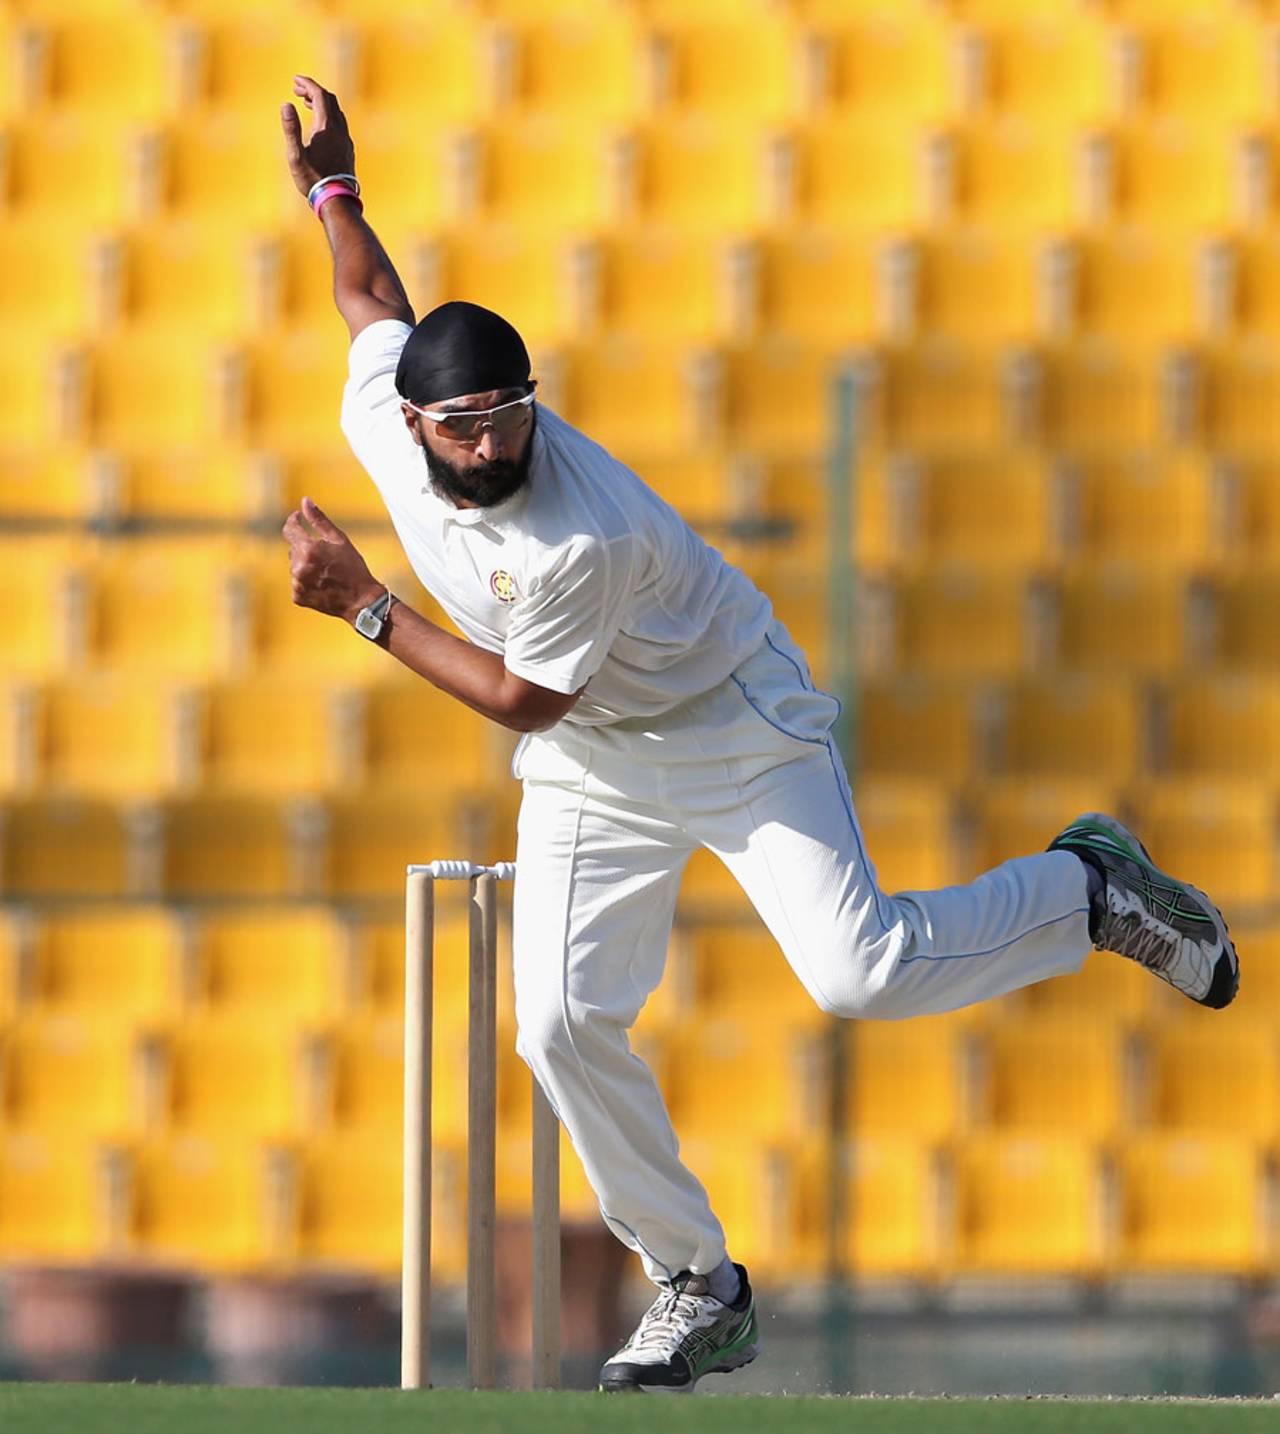 Monty Panesar's bowling effort at the Wankhede in 2012 is the second-best bowling performance based on ISV value, after Jim Laker's 19-wicket effort at the Old Trafford&nbsp;&nbsp;&bull;&nbsp;&nbsp;Getty Images